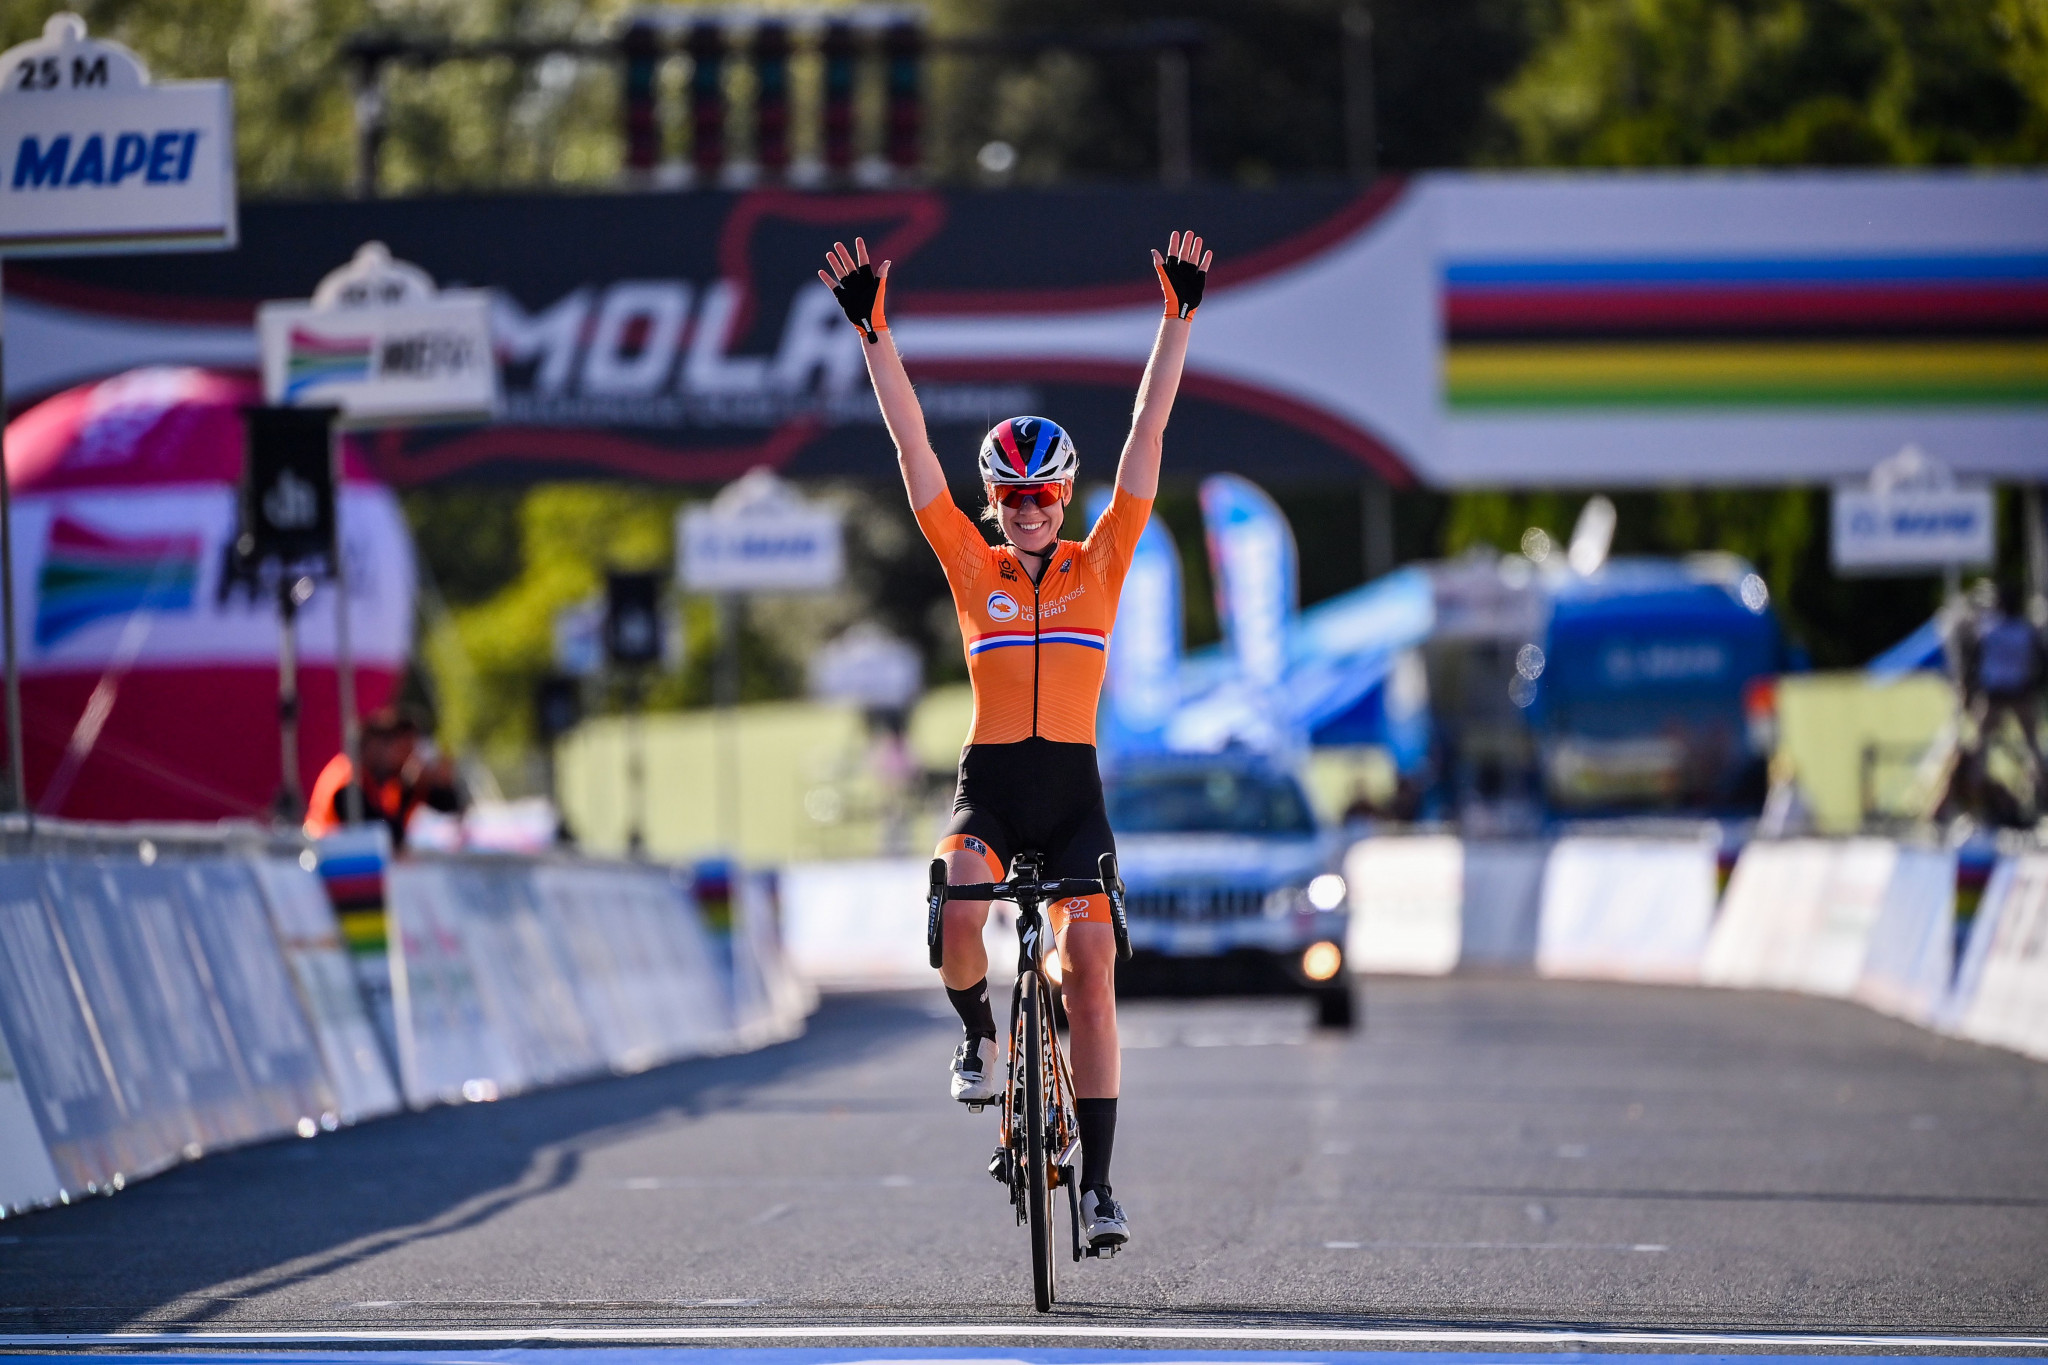 Van der Breggen clinches rare double with road race gold at UCI Road World Championships